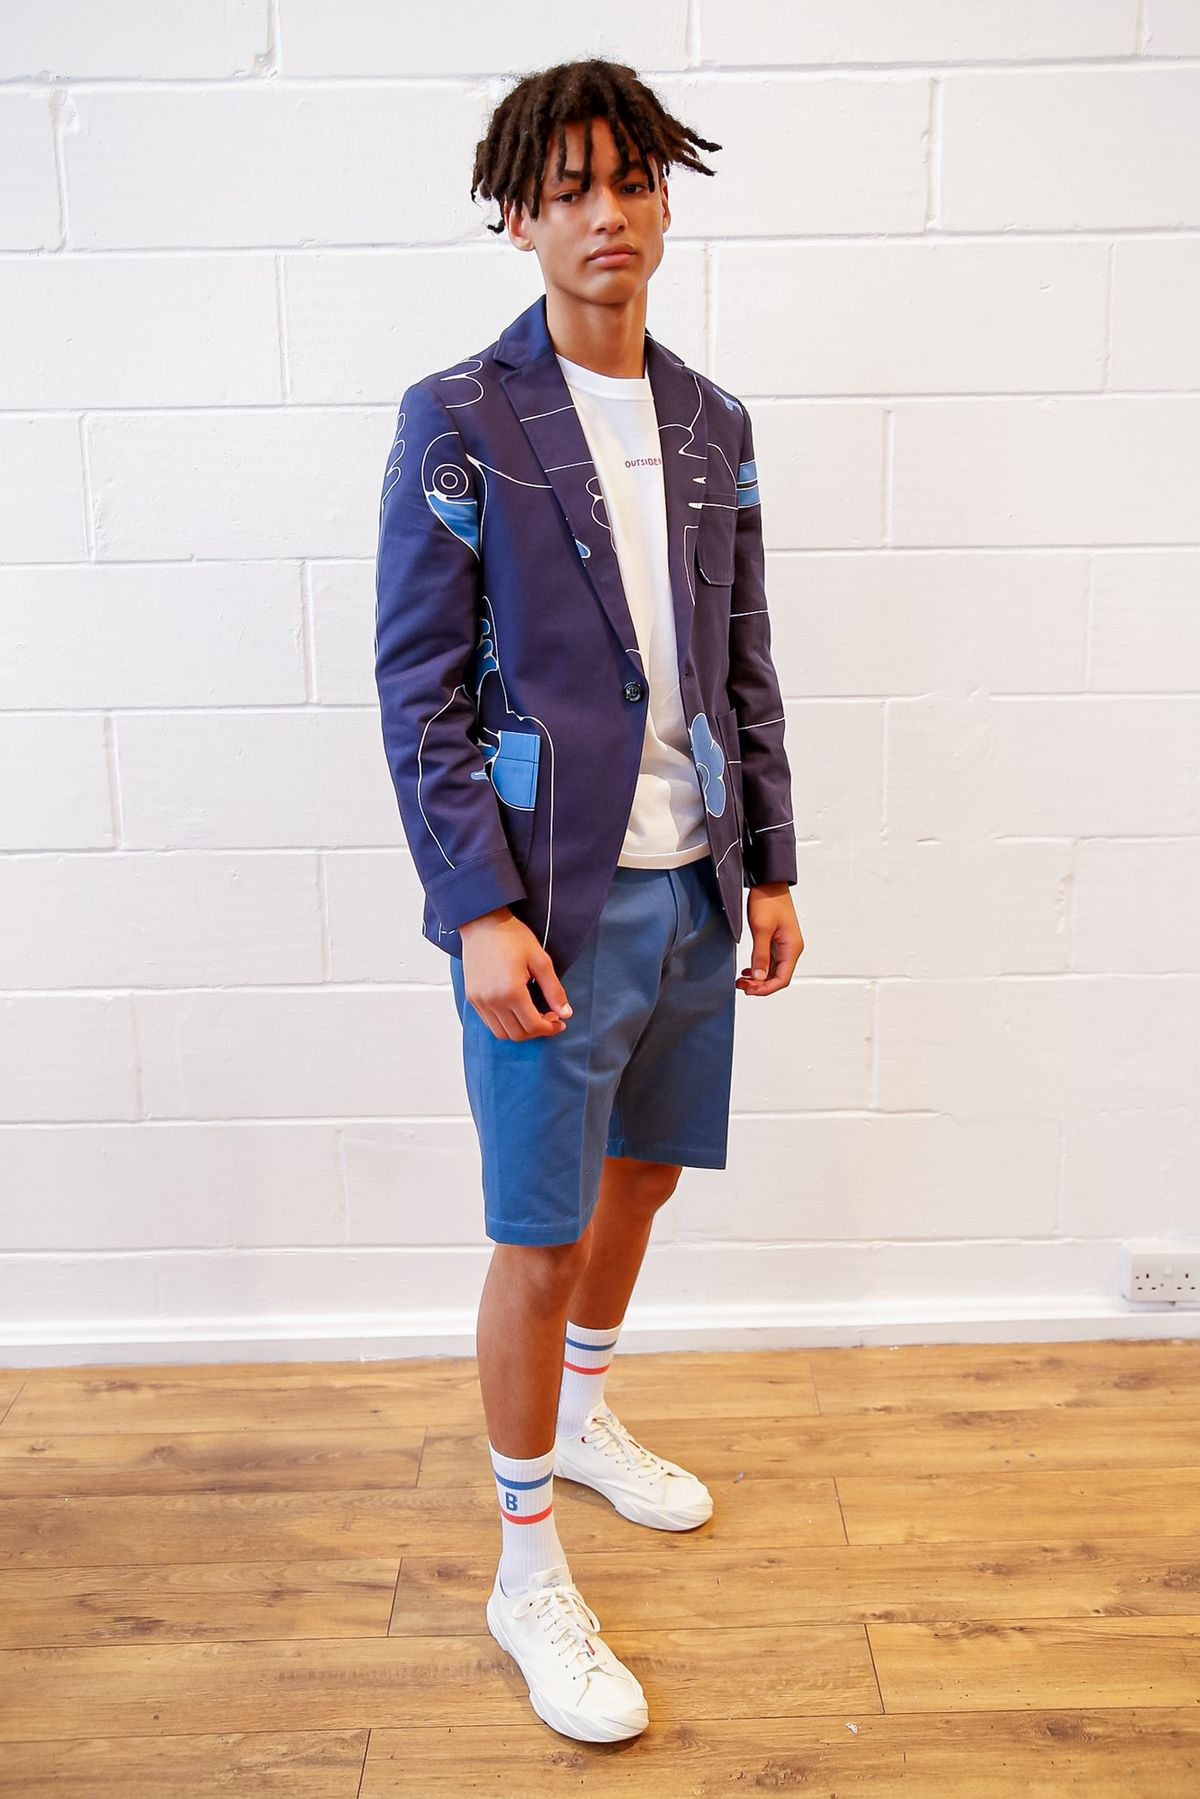 Band of Outsiders Spring/Summer 2020 London - Fashionably Male